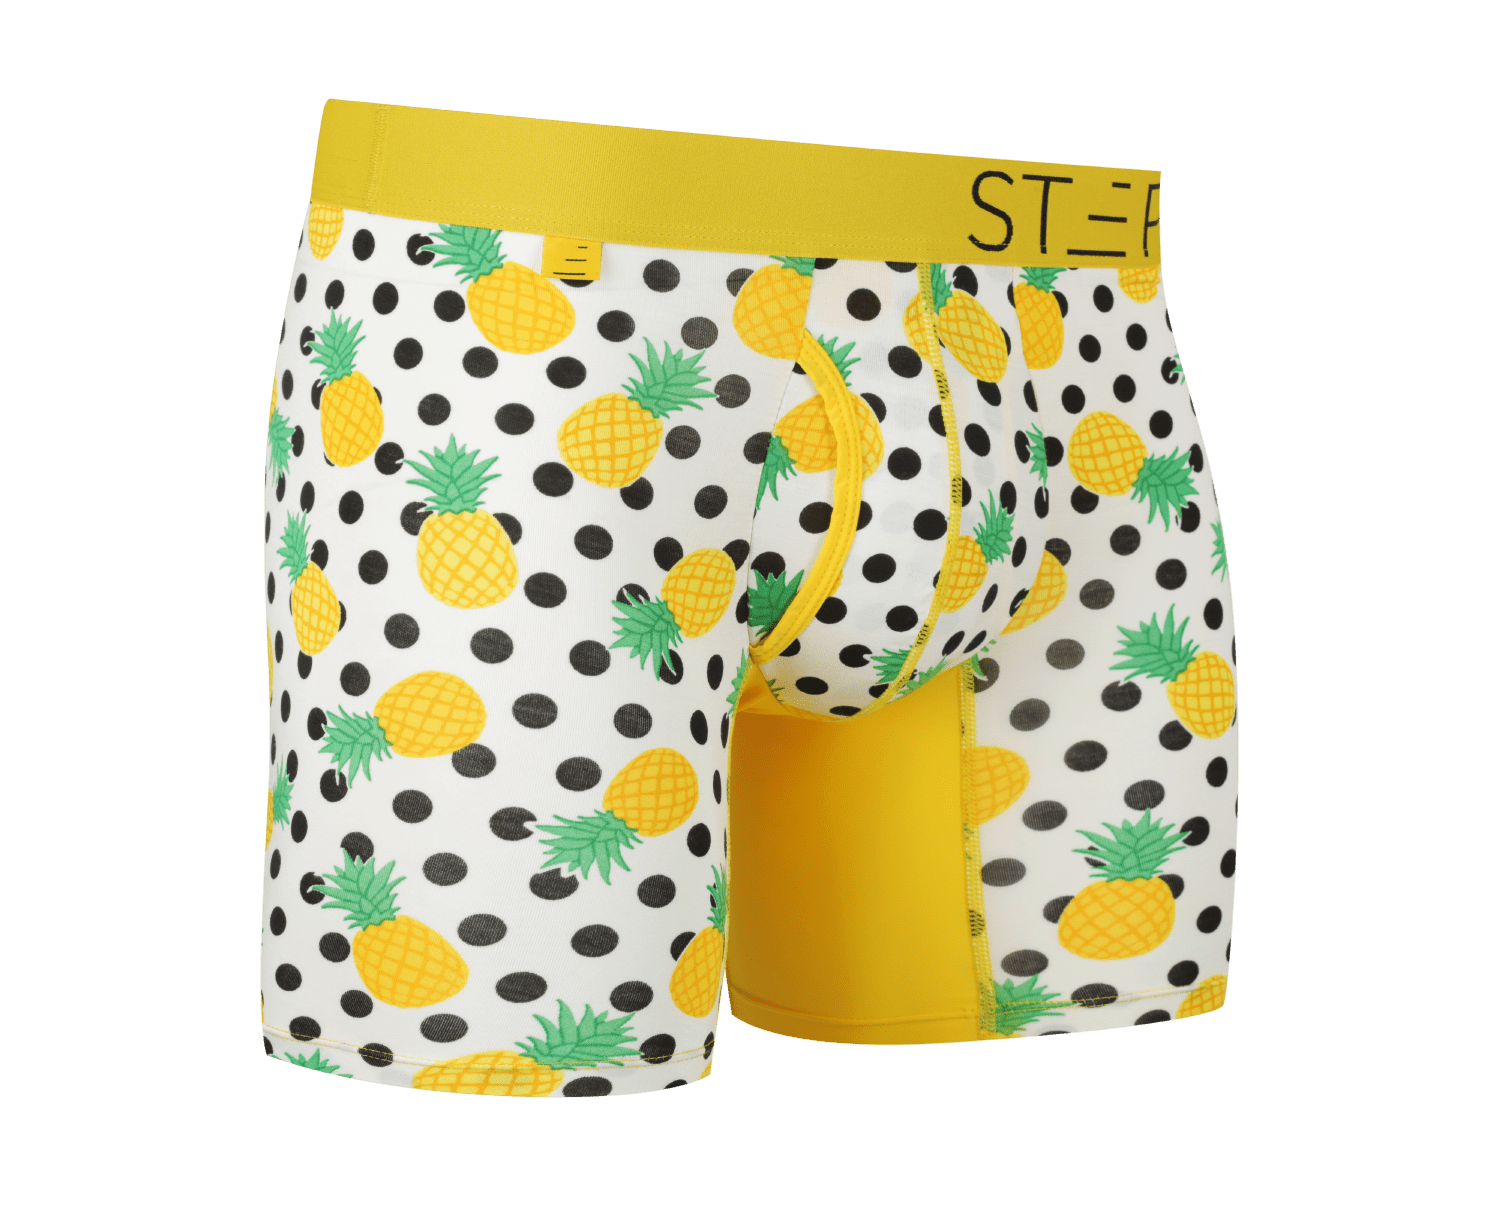 Boxer Brief Fly - Skid Marks